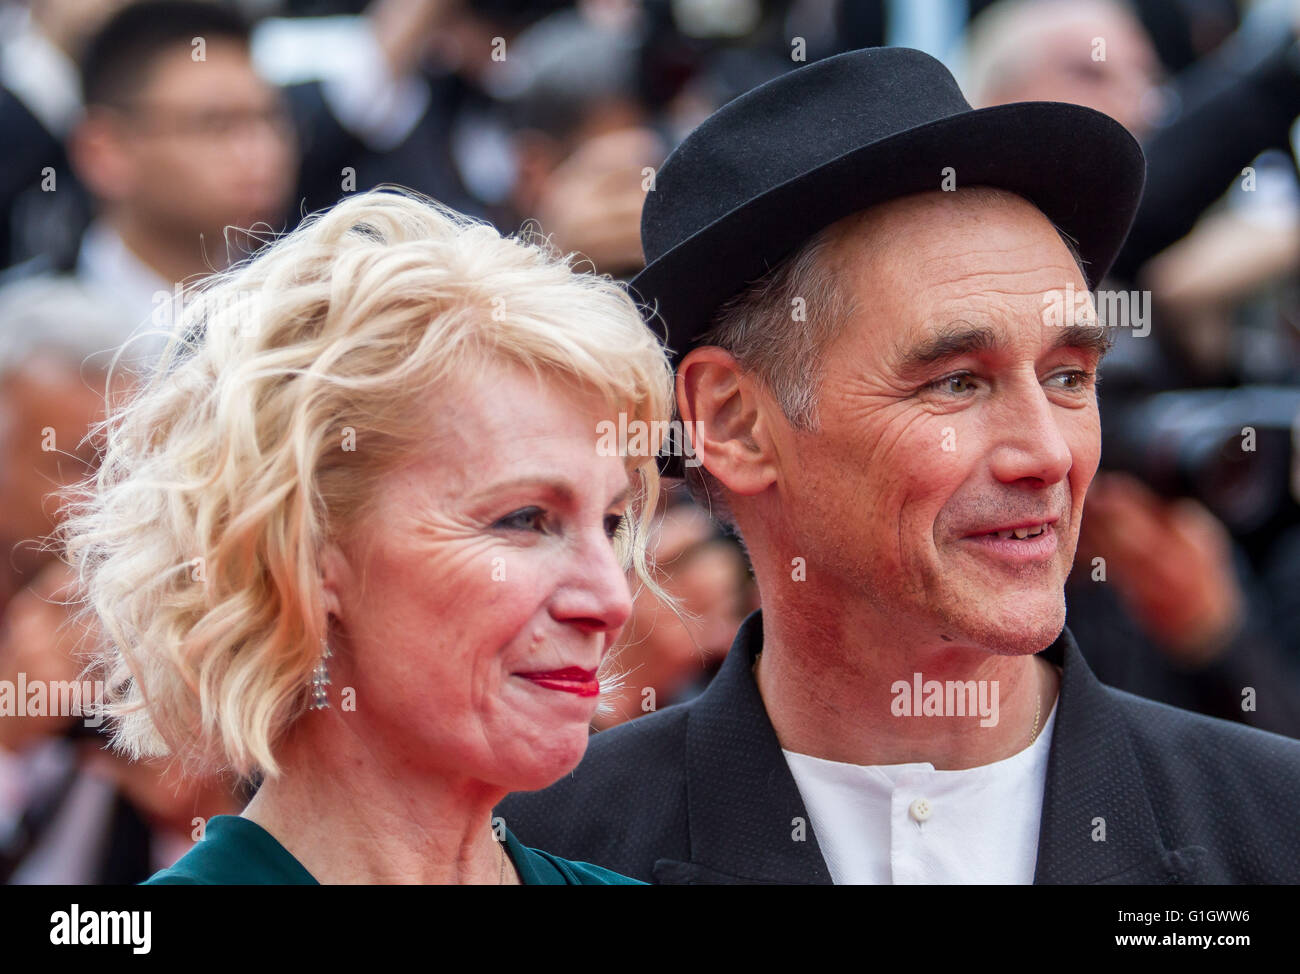 CLAIRE VAN KAMPEN, MARK RYLANCE  ACTOR  THE BFG. PREMIERE 69TH CANNES FILM FESTIVAL  CANNES, , FRANCE  15 May 2016  DIW89320 Stock Photo